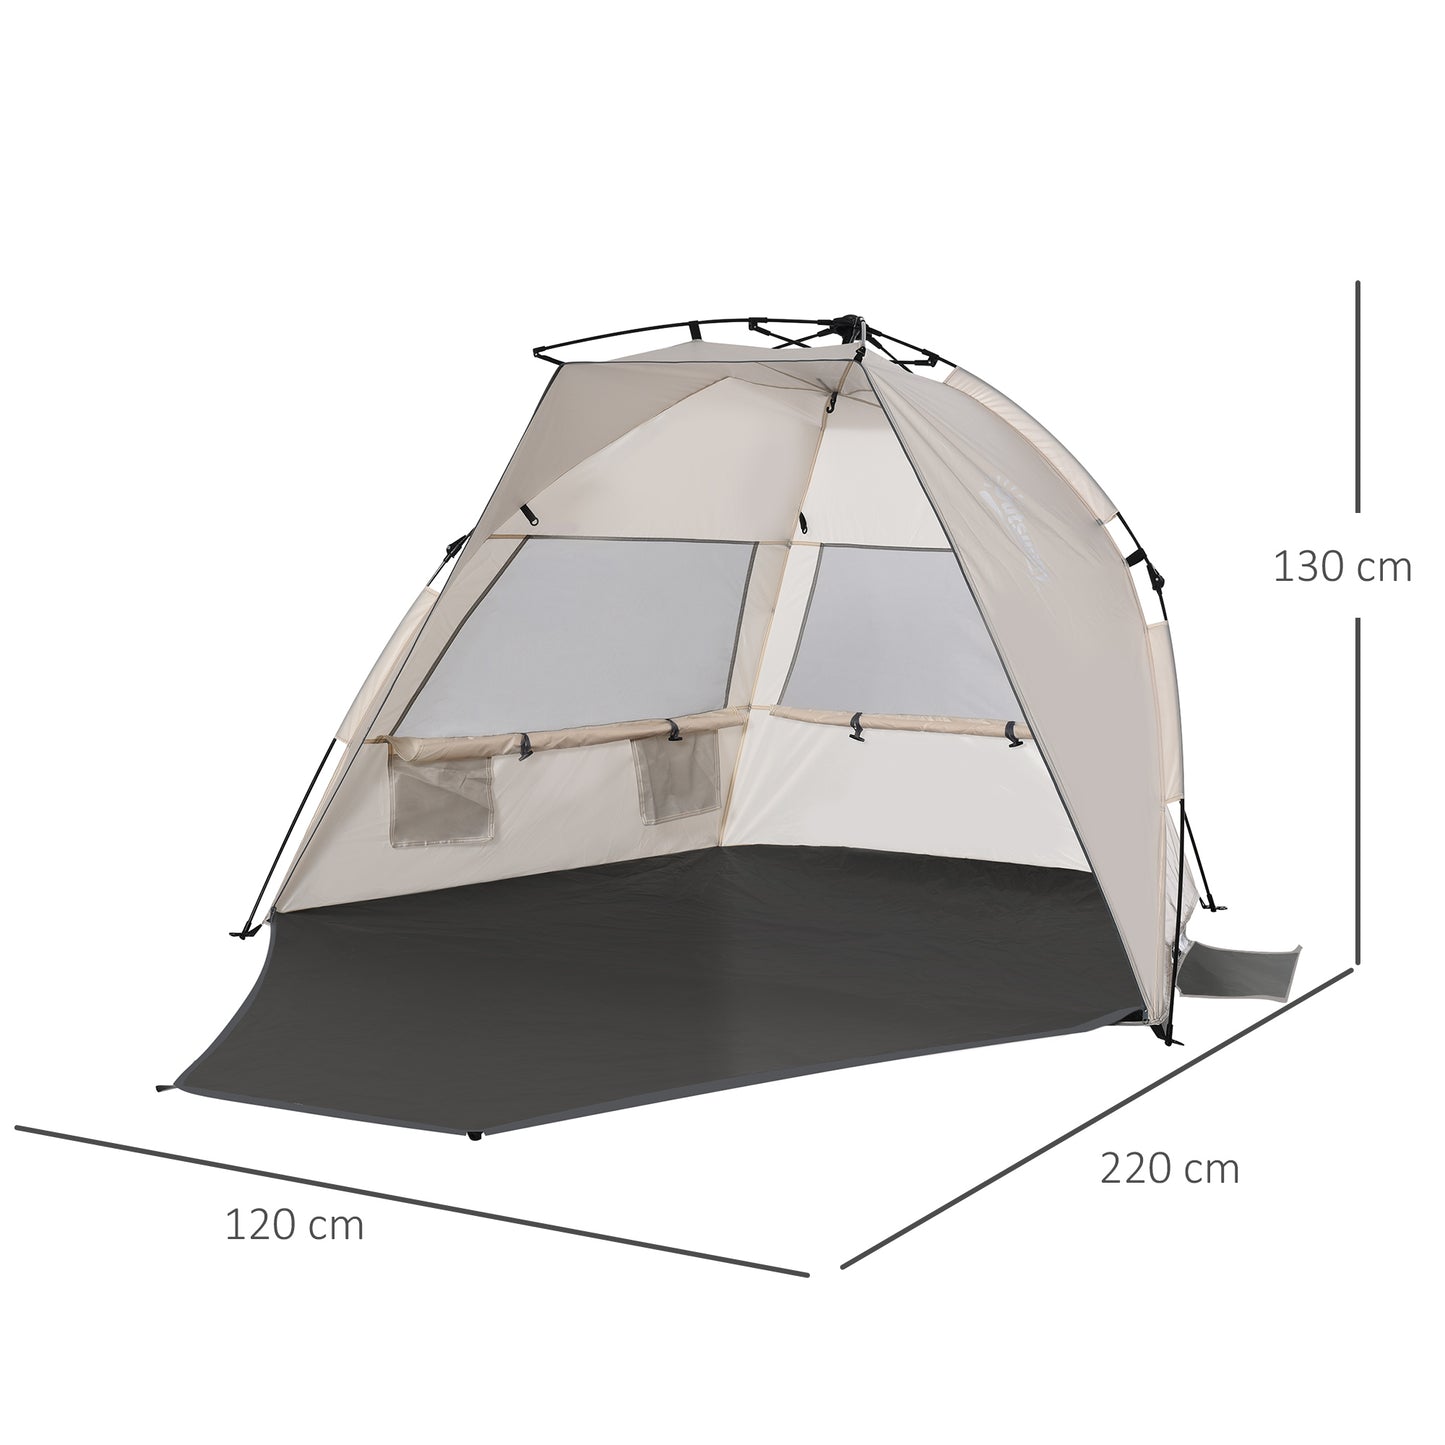 Outsunny Beach Tent for 1-2 Person Pop-up Design with 3 Mesh Windows & Carrying Bag Cream